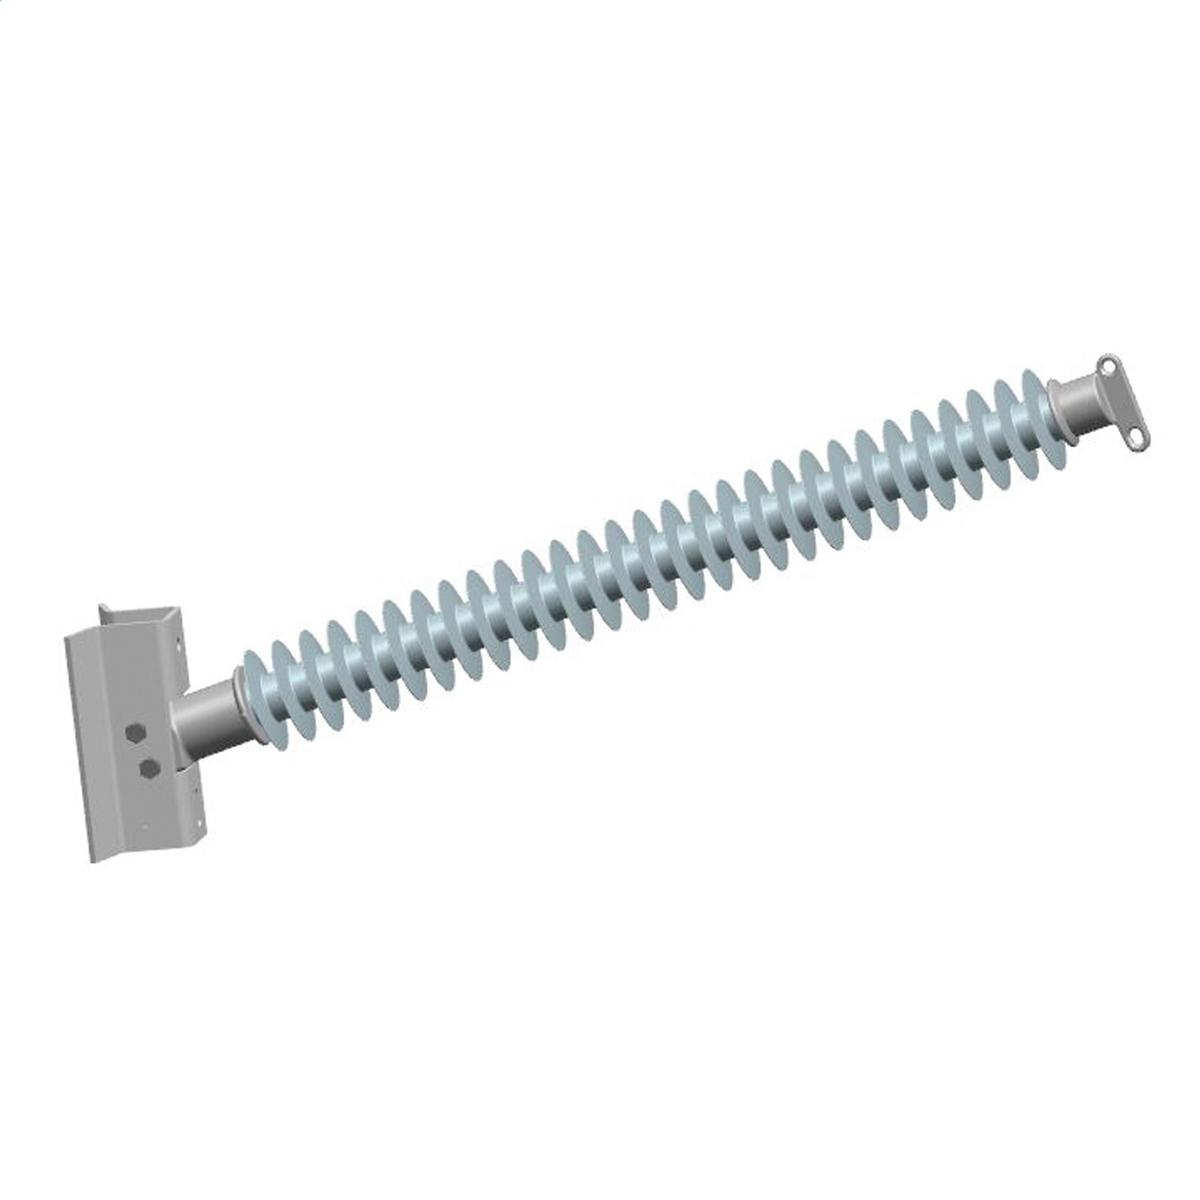 Hubbell P300047S0070 3.0" Line Post, 2 hole blade, Steel Gain base 14"CL 1" bolts  ; Made from hydrophobic silicone polymer ; 